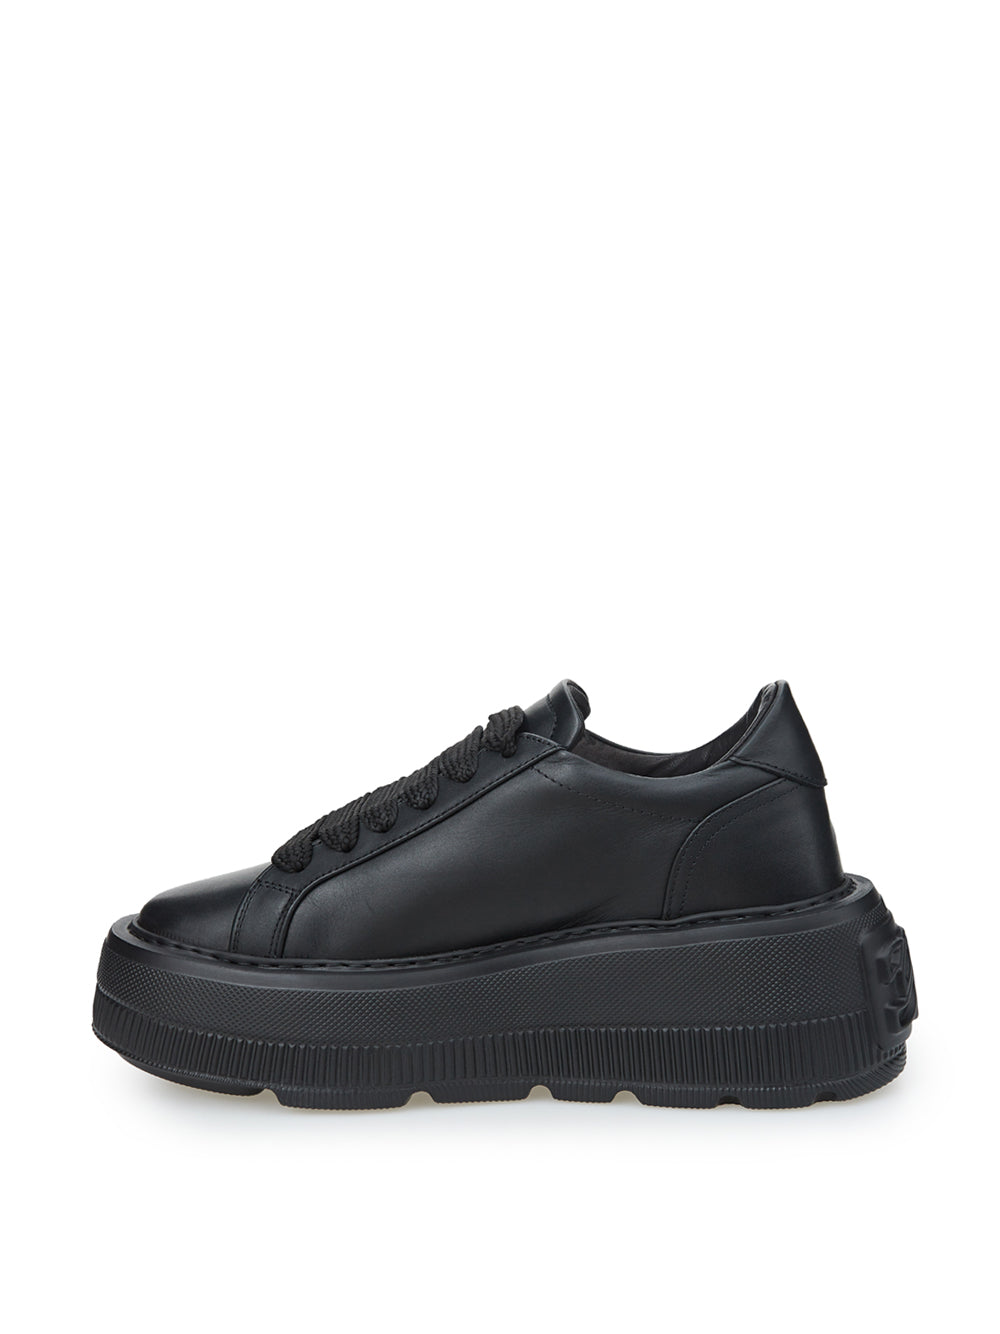 Casadei Elevate Your Style: Black Leather Maxi Platform Sneakers